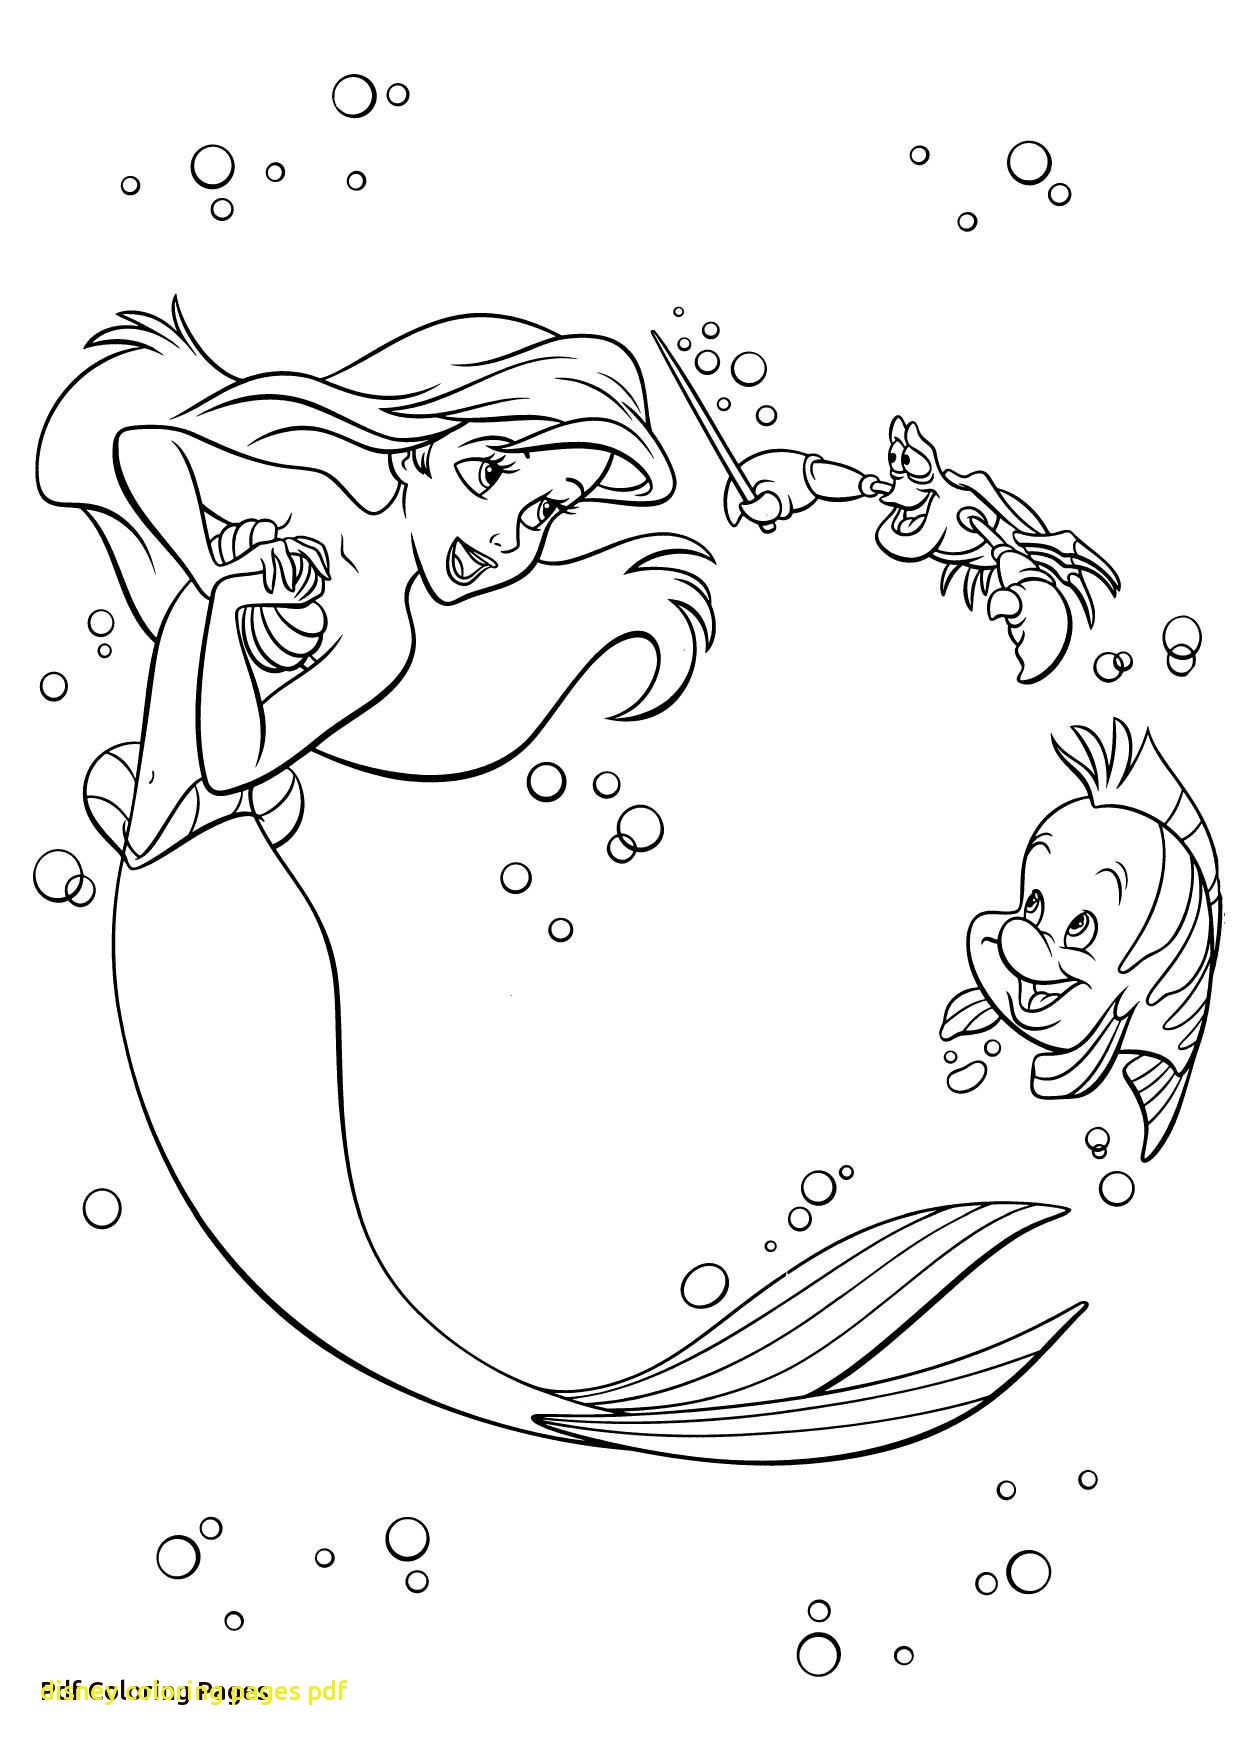 Arabic Alphabet Coloring Pages at GetColorings.com | Free ...